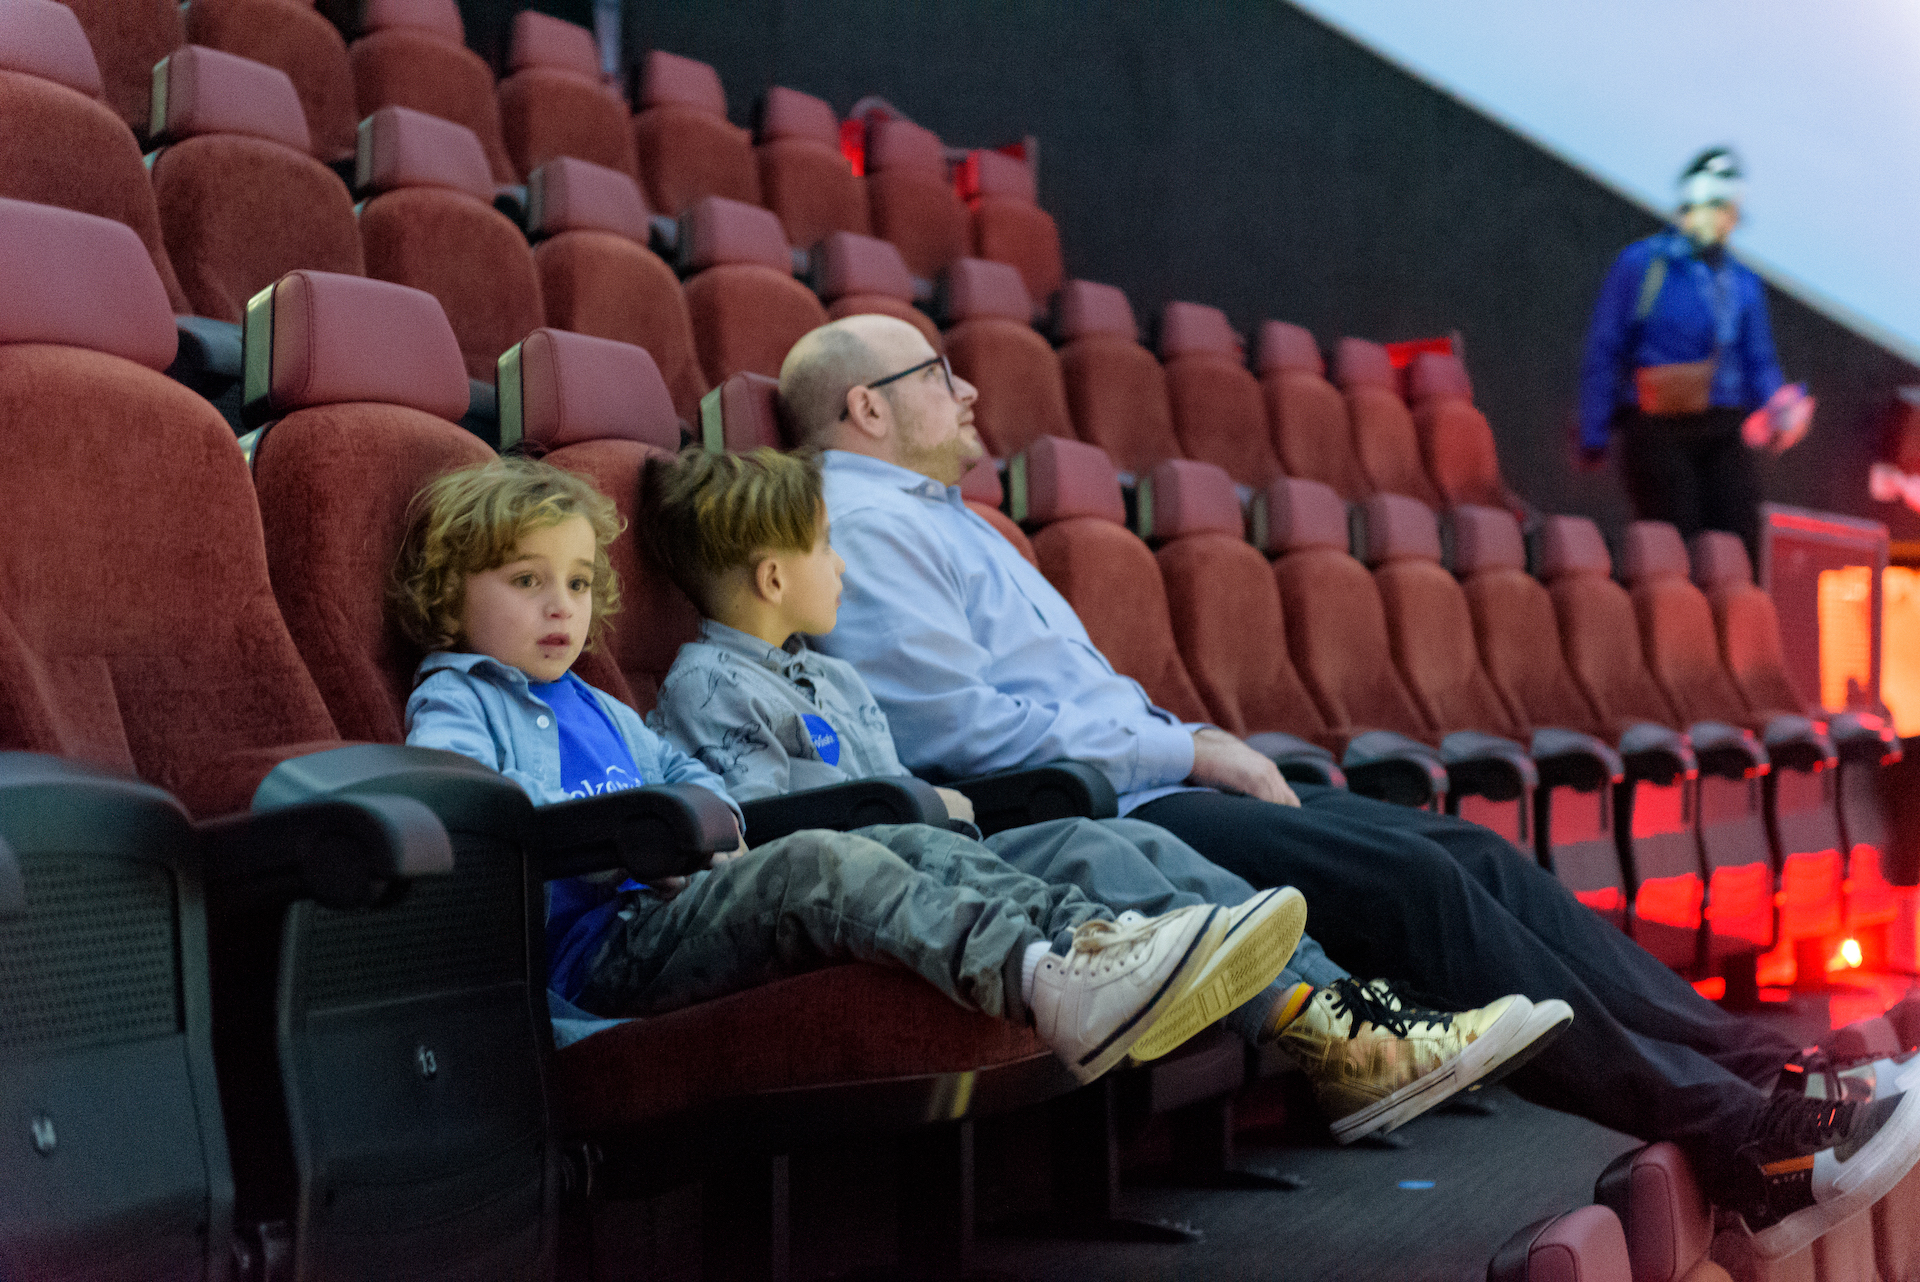 Jules and family get ready to enjoy a dino-themed planetarium show